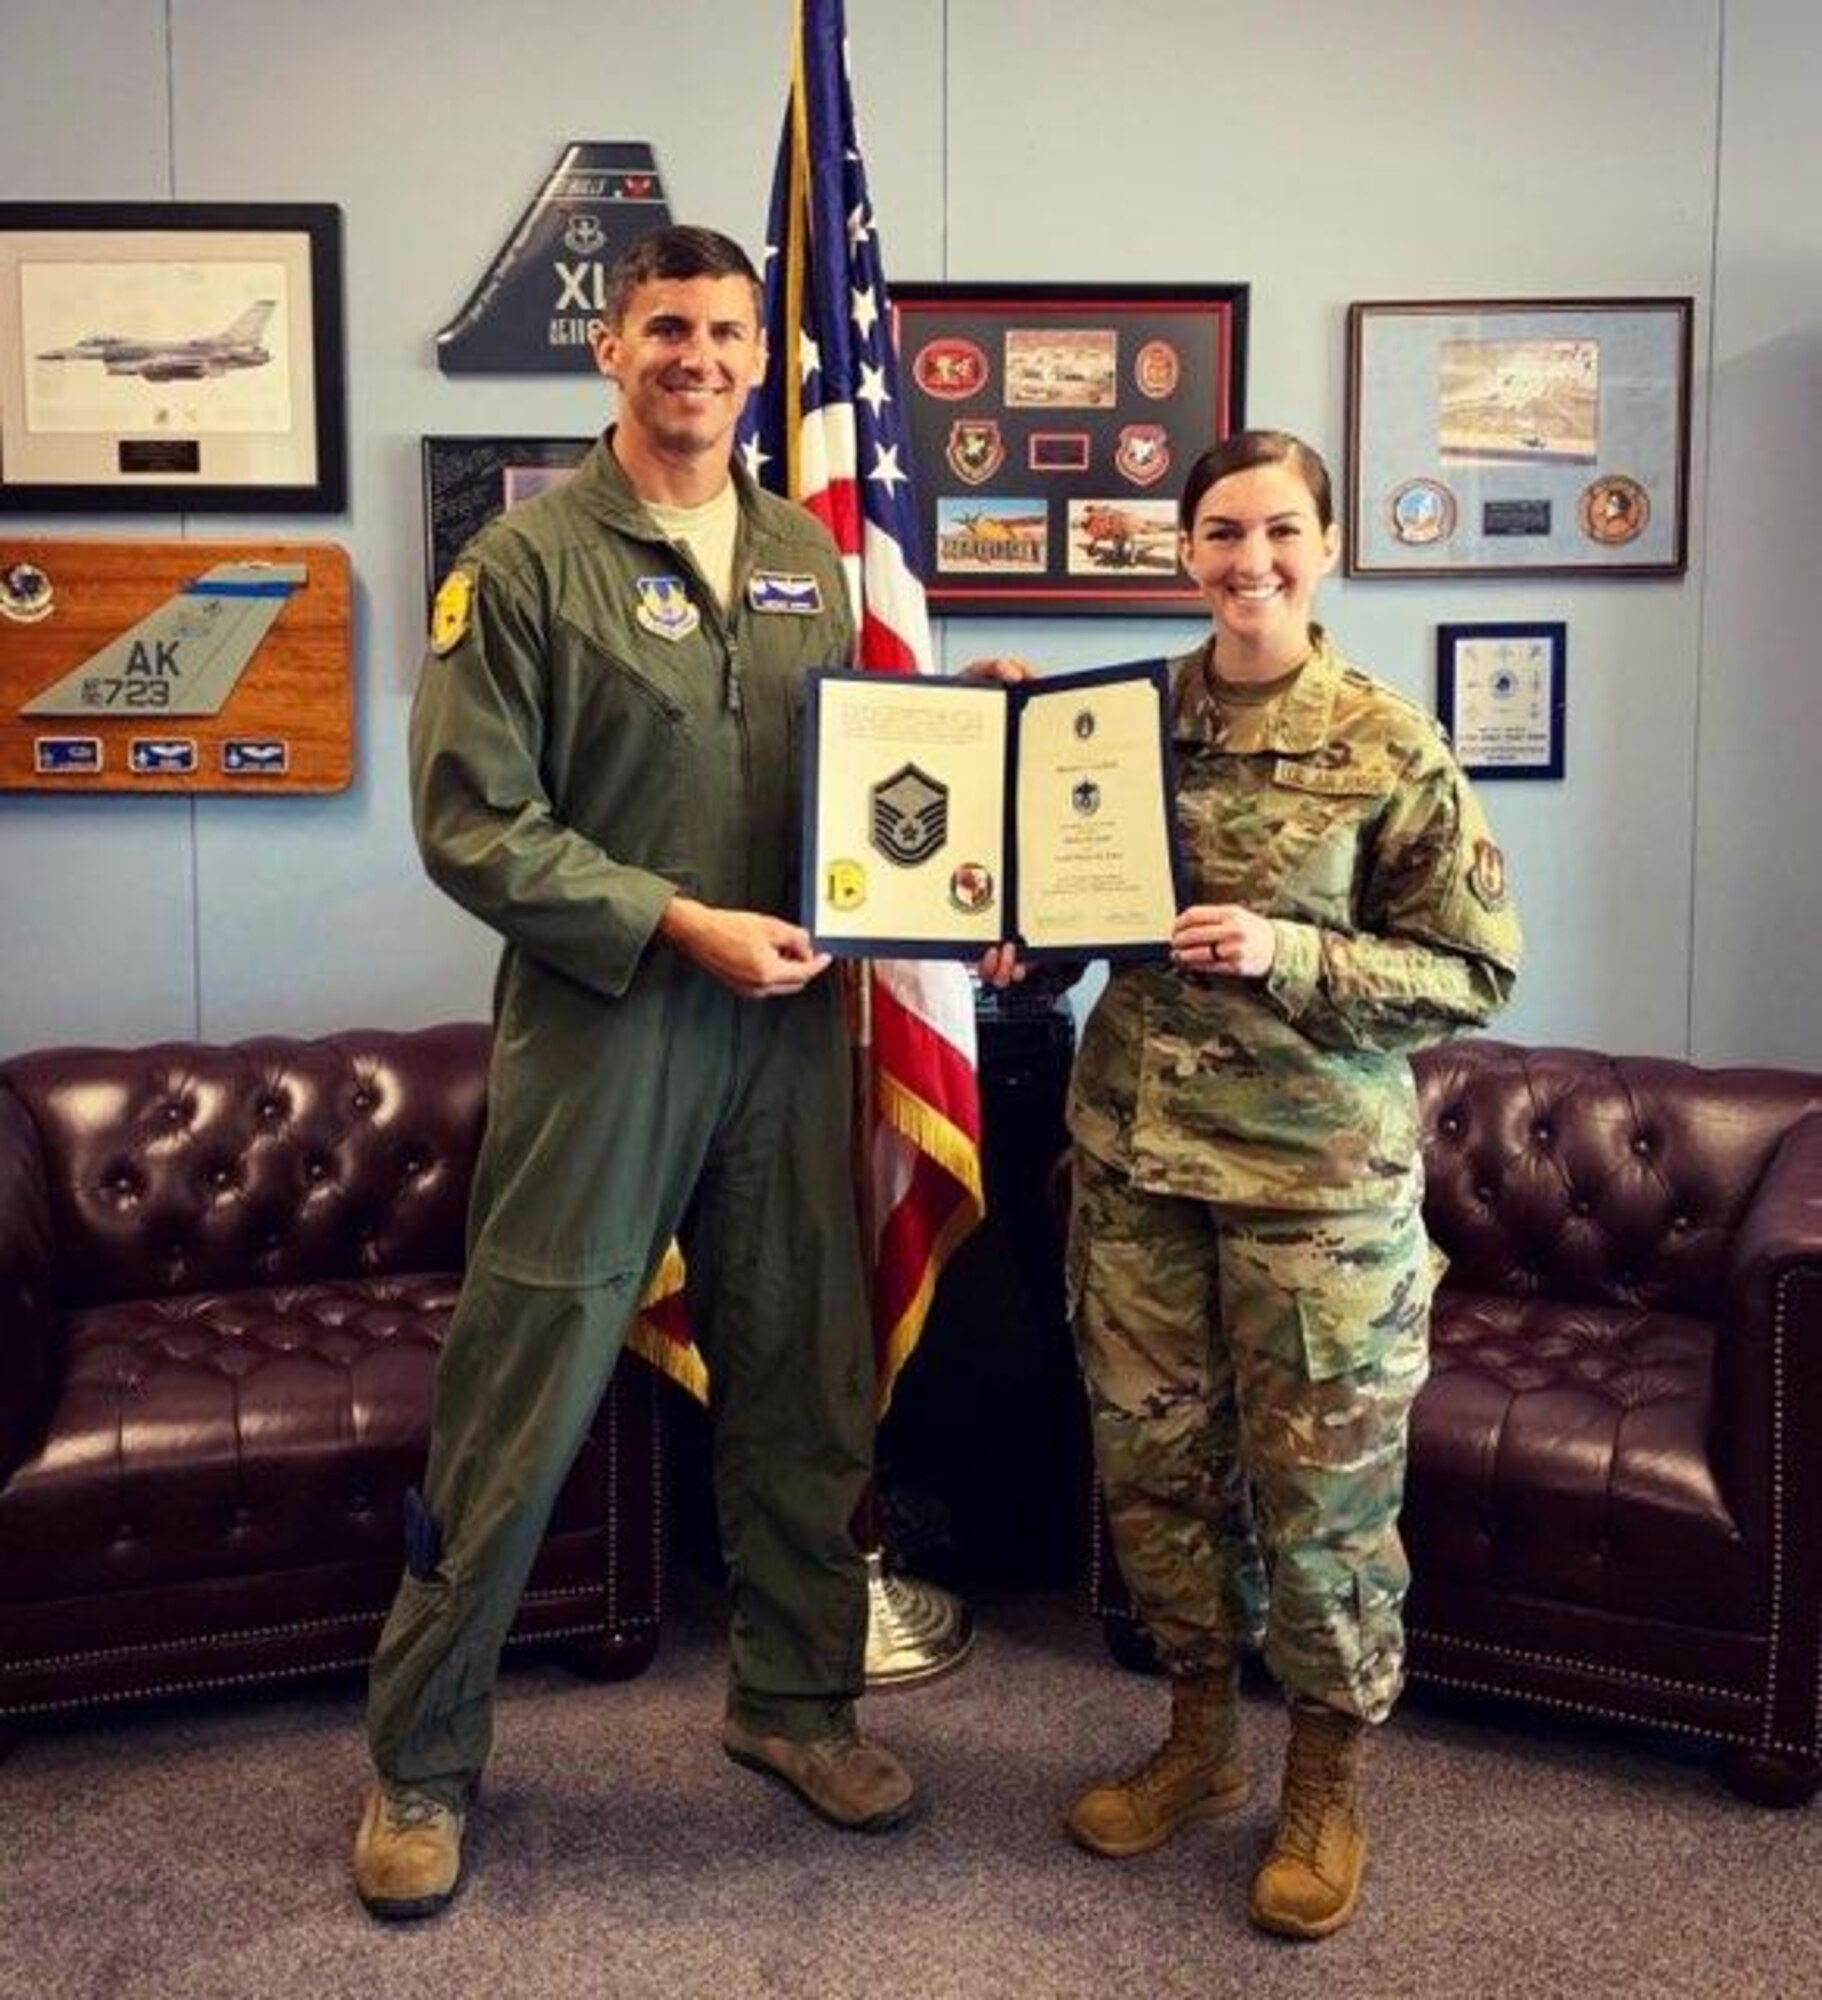 MSgt. Shannon Cassinelli is the Deputy Airfield Manager at Duke Field Air Force Base in Florida. She grew up in Rockford, Illinois with 3 siblings and her parents. Something she cherishes most about her childhood is all of the time her family spent together and her parents doing everything necessary to provide a great life for their kids.